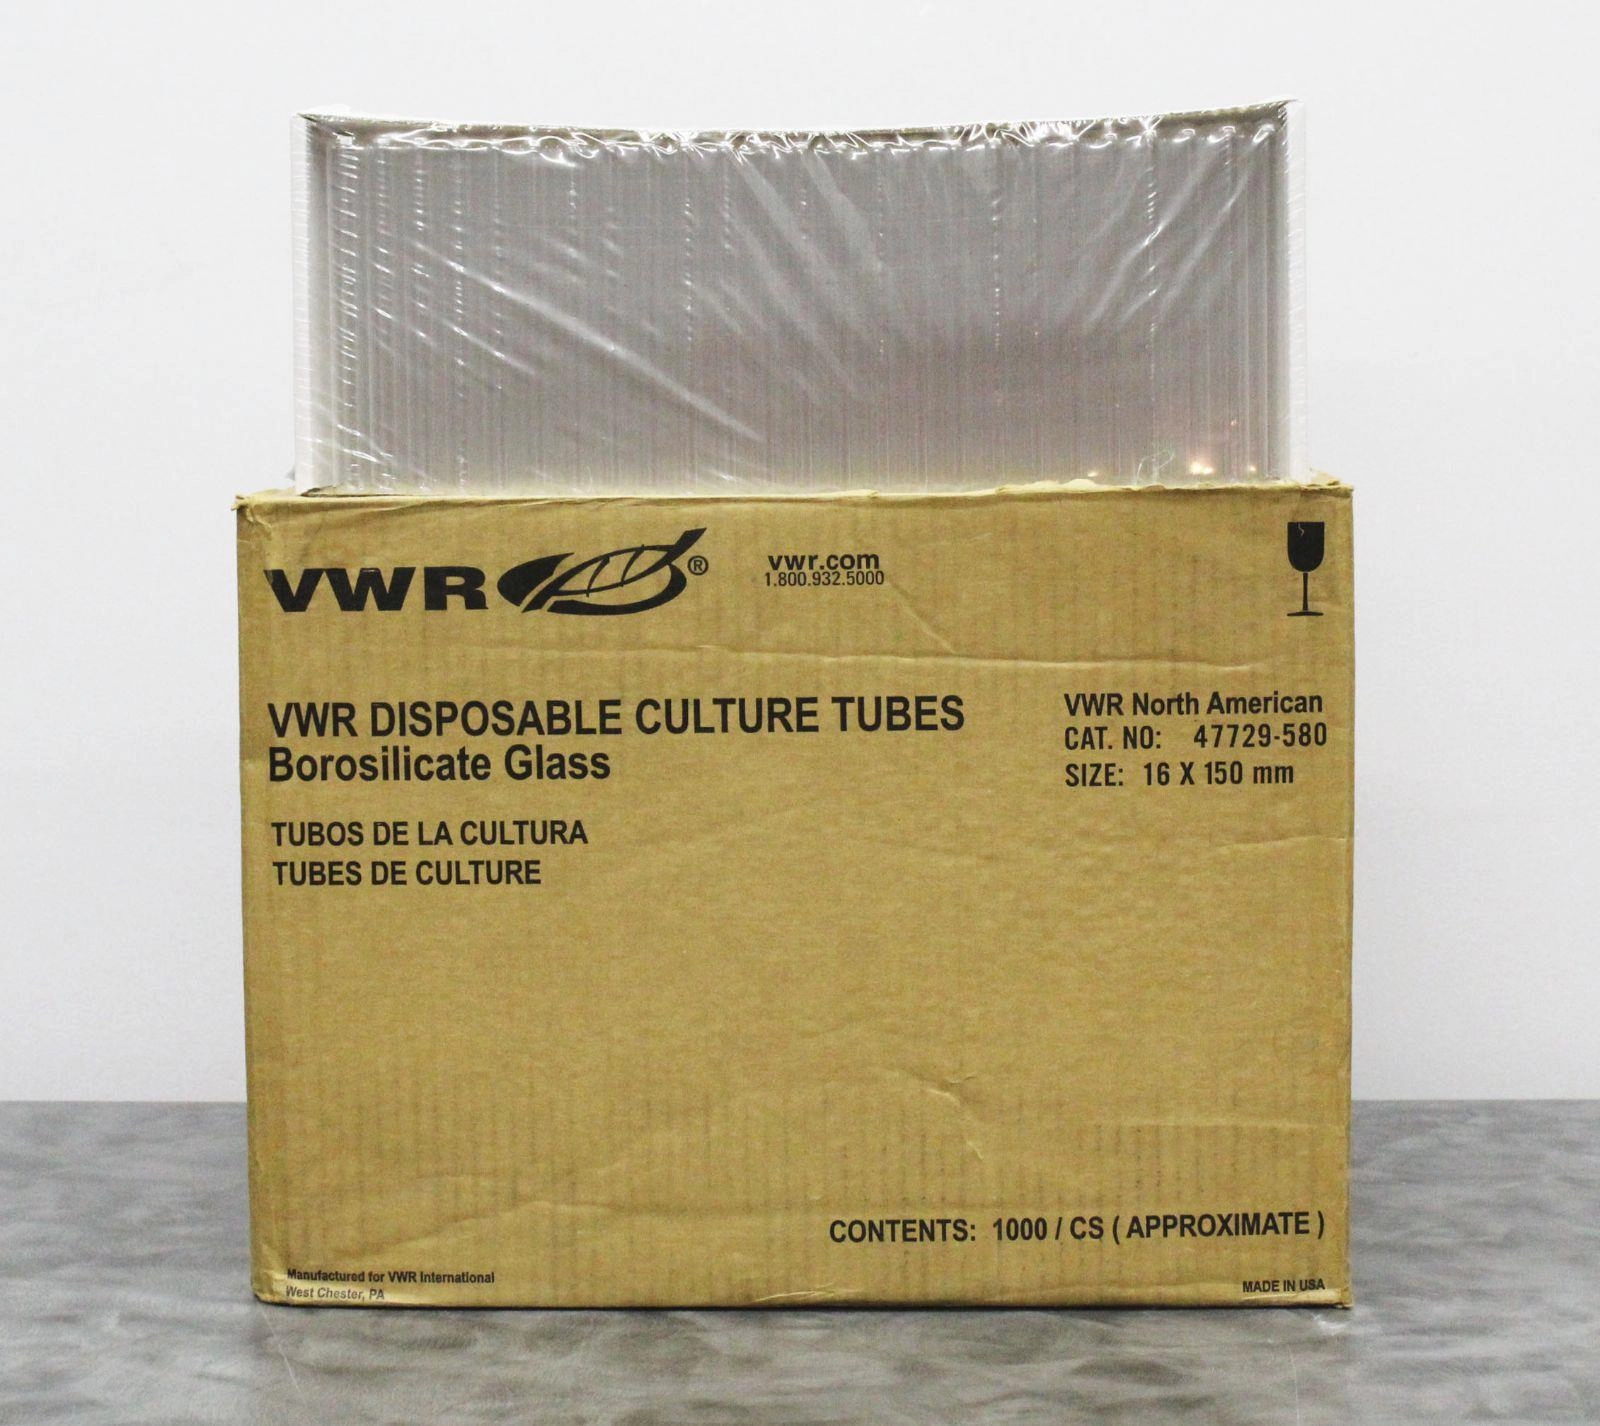 NEW VWR 30825-443 Disposable Culture Tubes Lime Glass 18x150 mm Case of 500